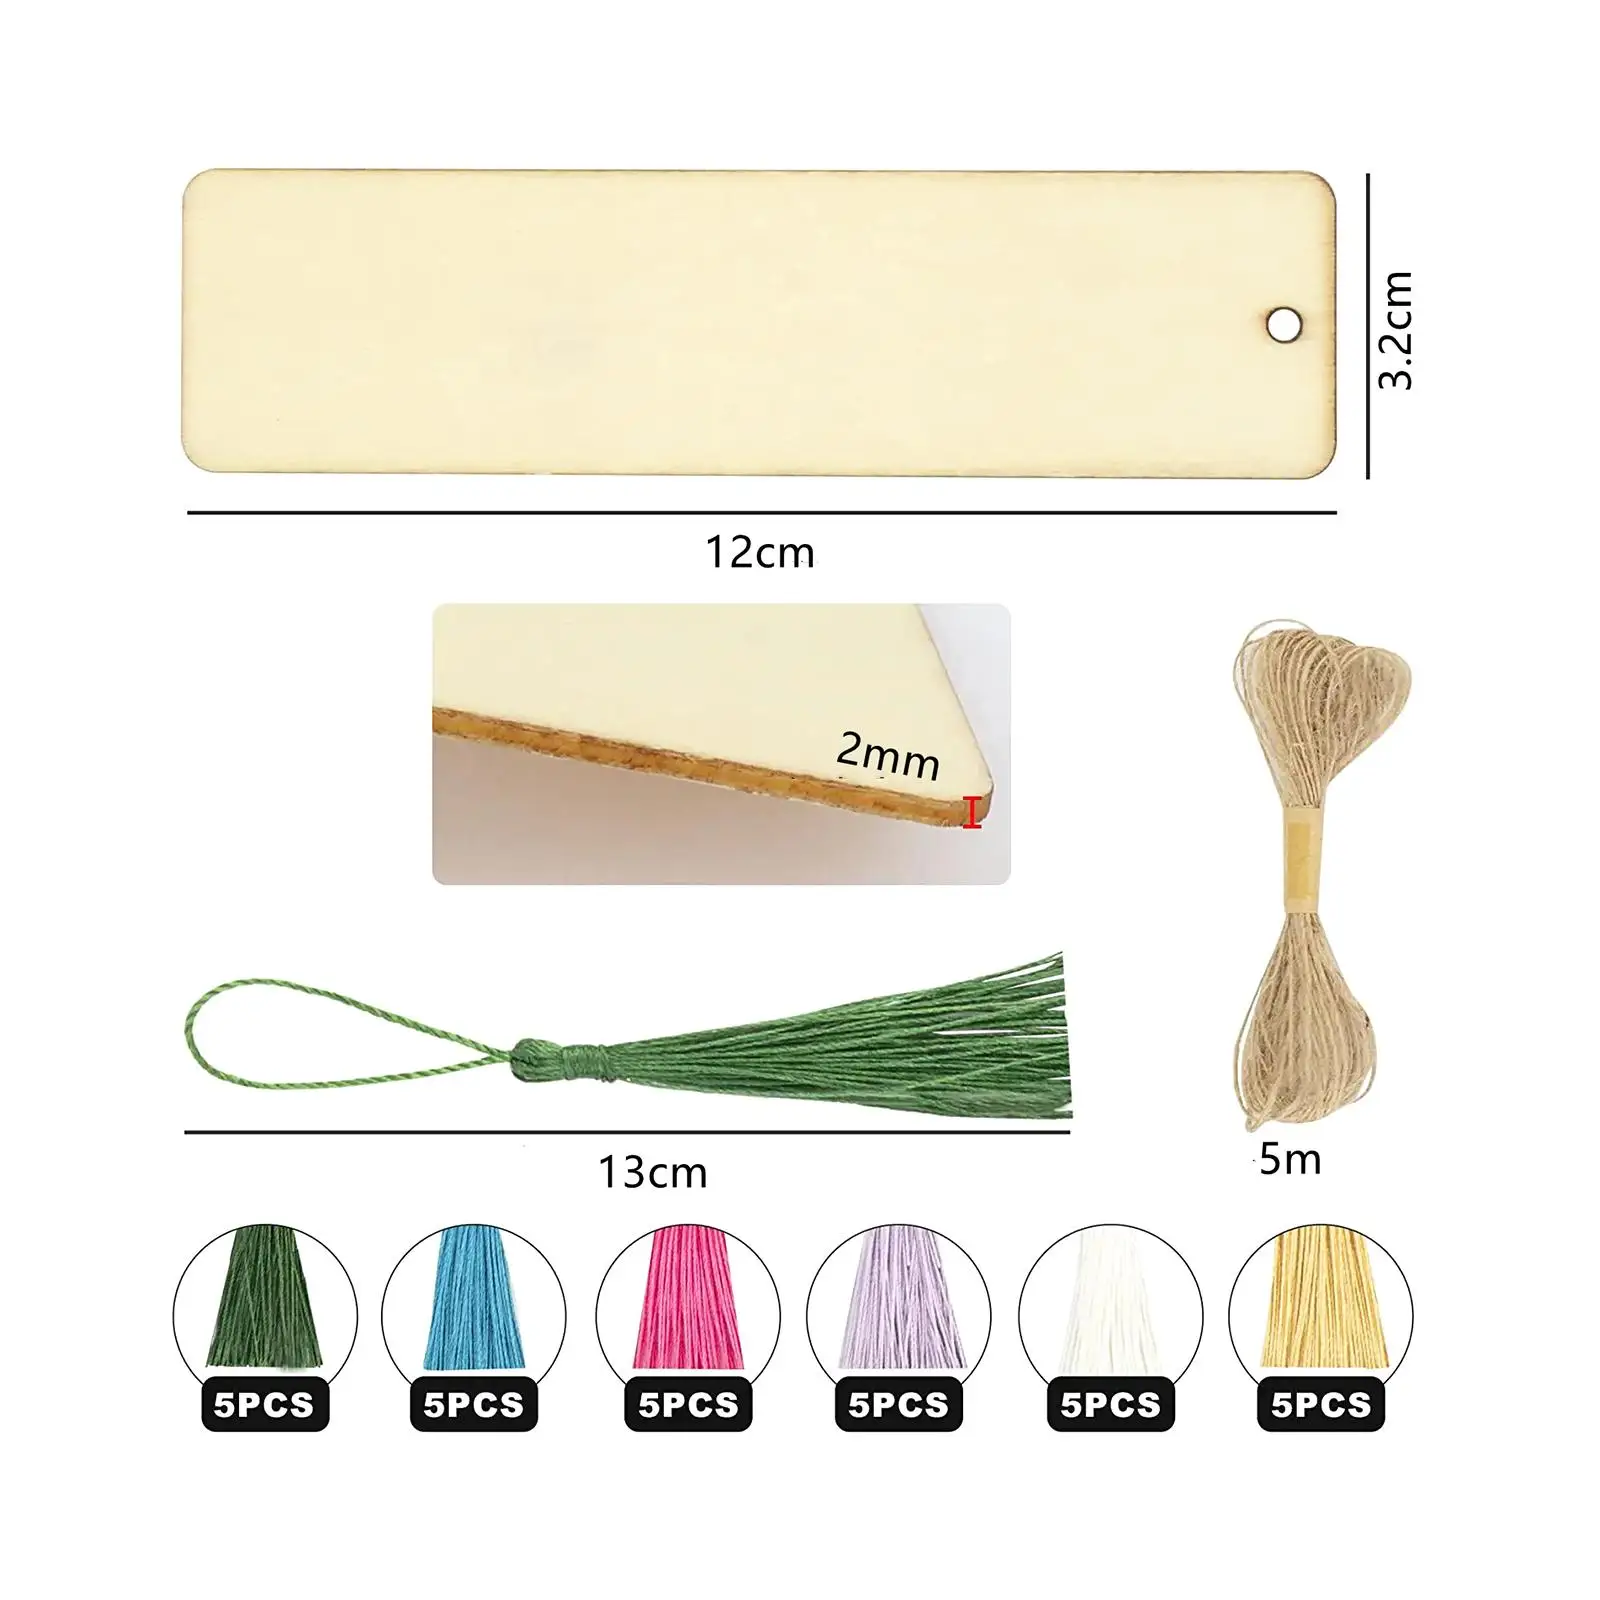 30x Wood Blank Bookmarks with Tassels Present Tag Markers DIY Souvenir Handmade for Reading Student Office Supplies